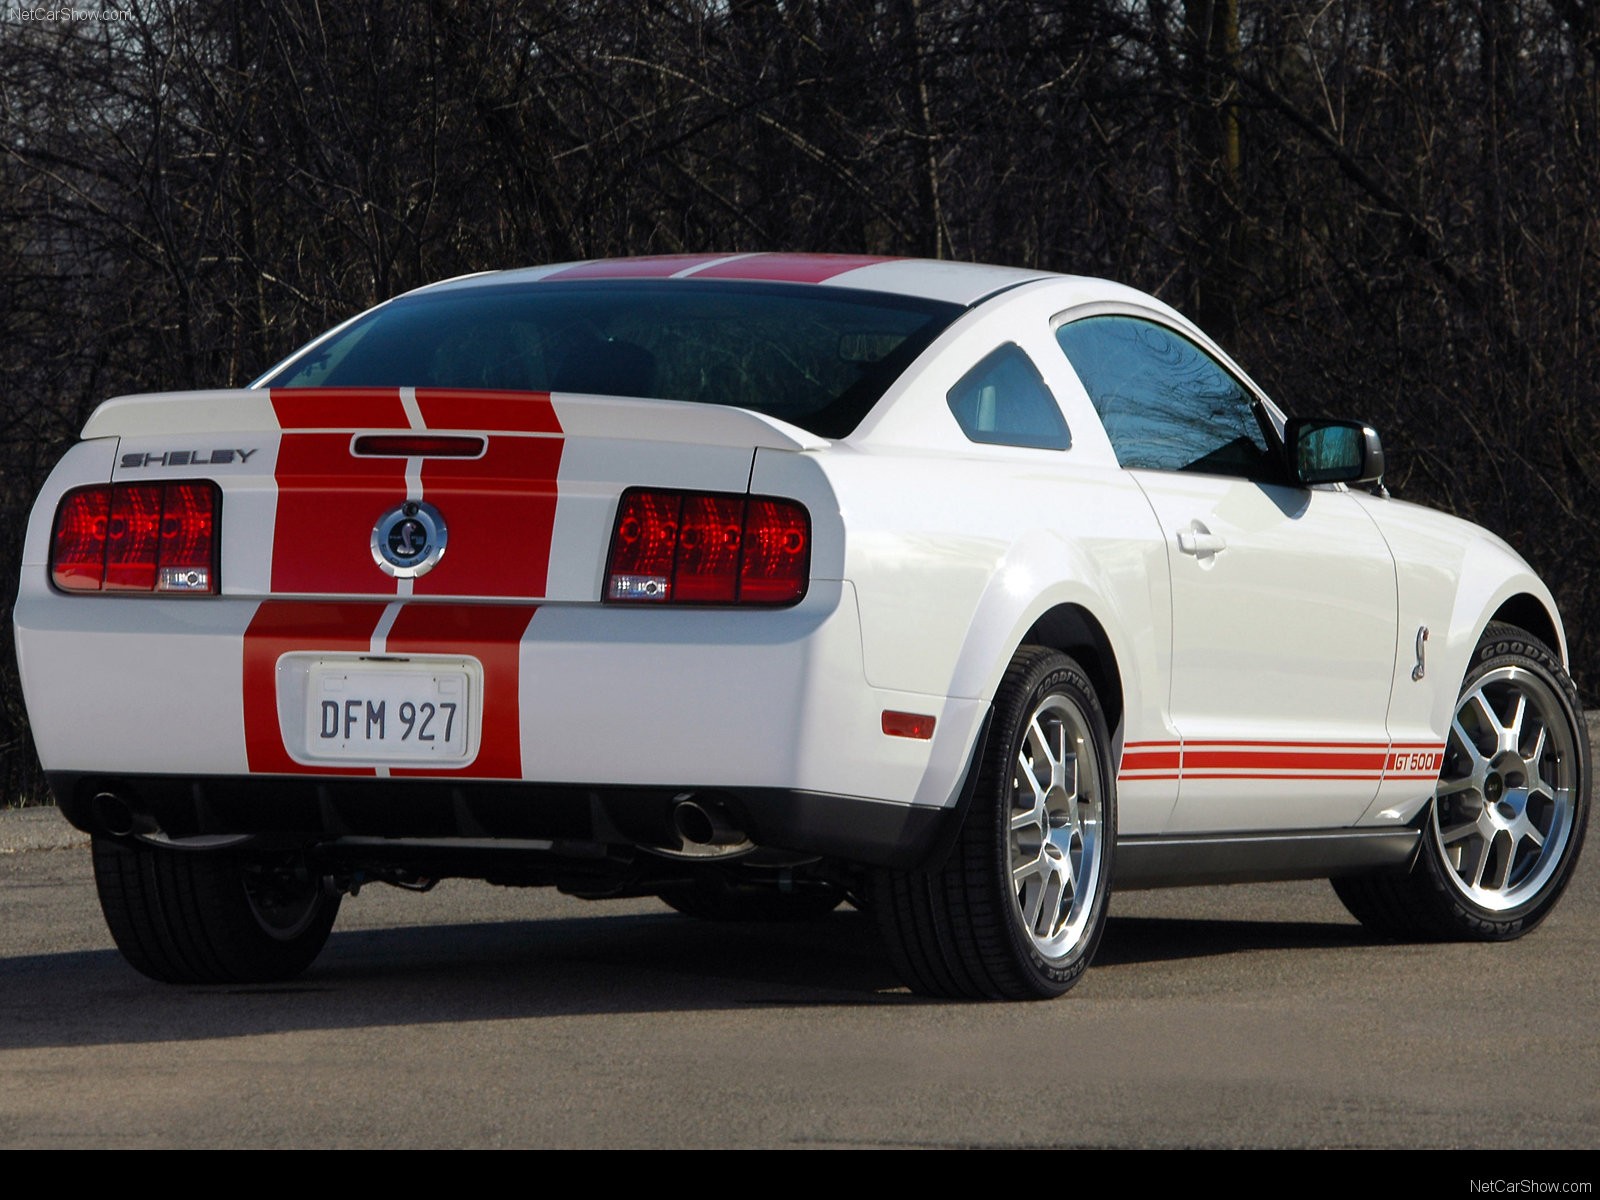 General 1600x1200 Ford Ford Mustang car white cars vehicle Ford Mustang S-197 muscle cars American cars racing stripes